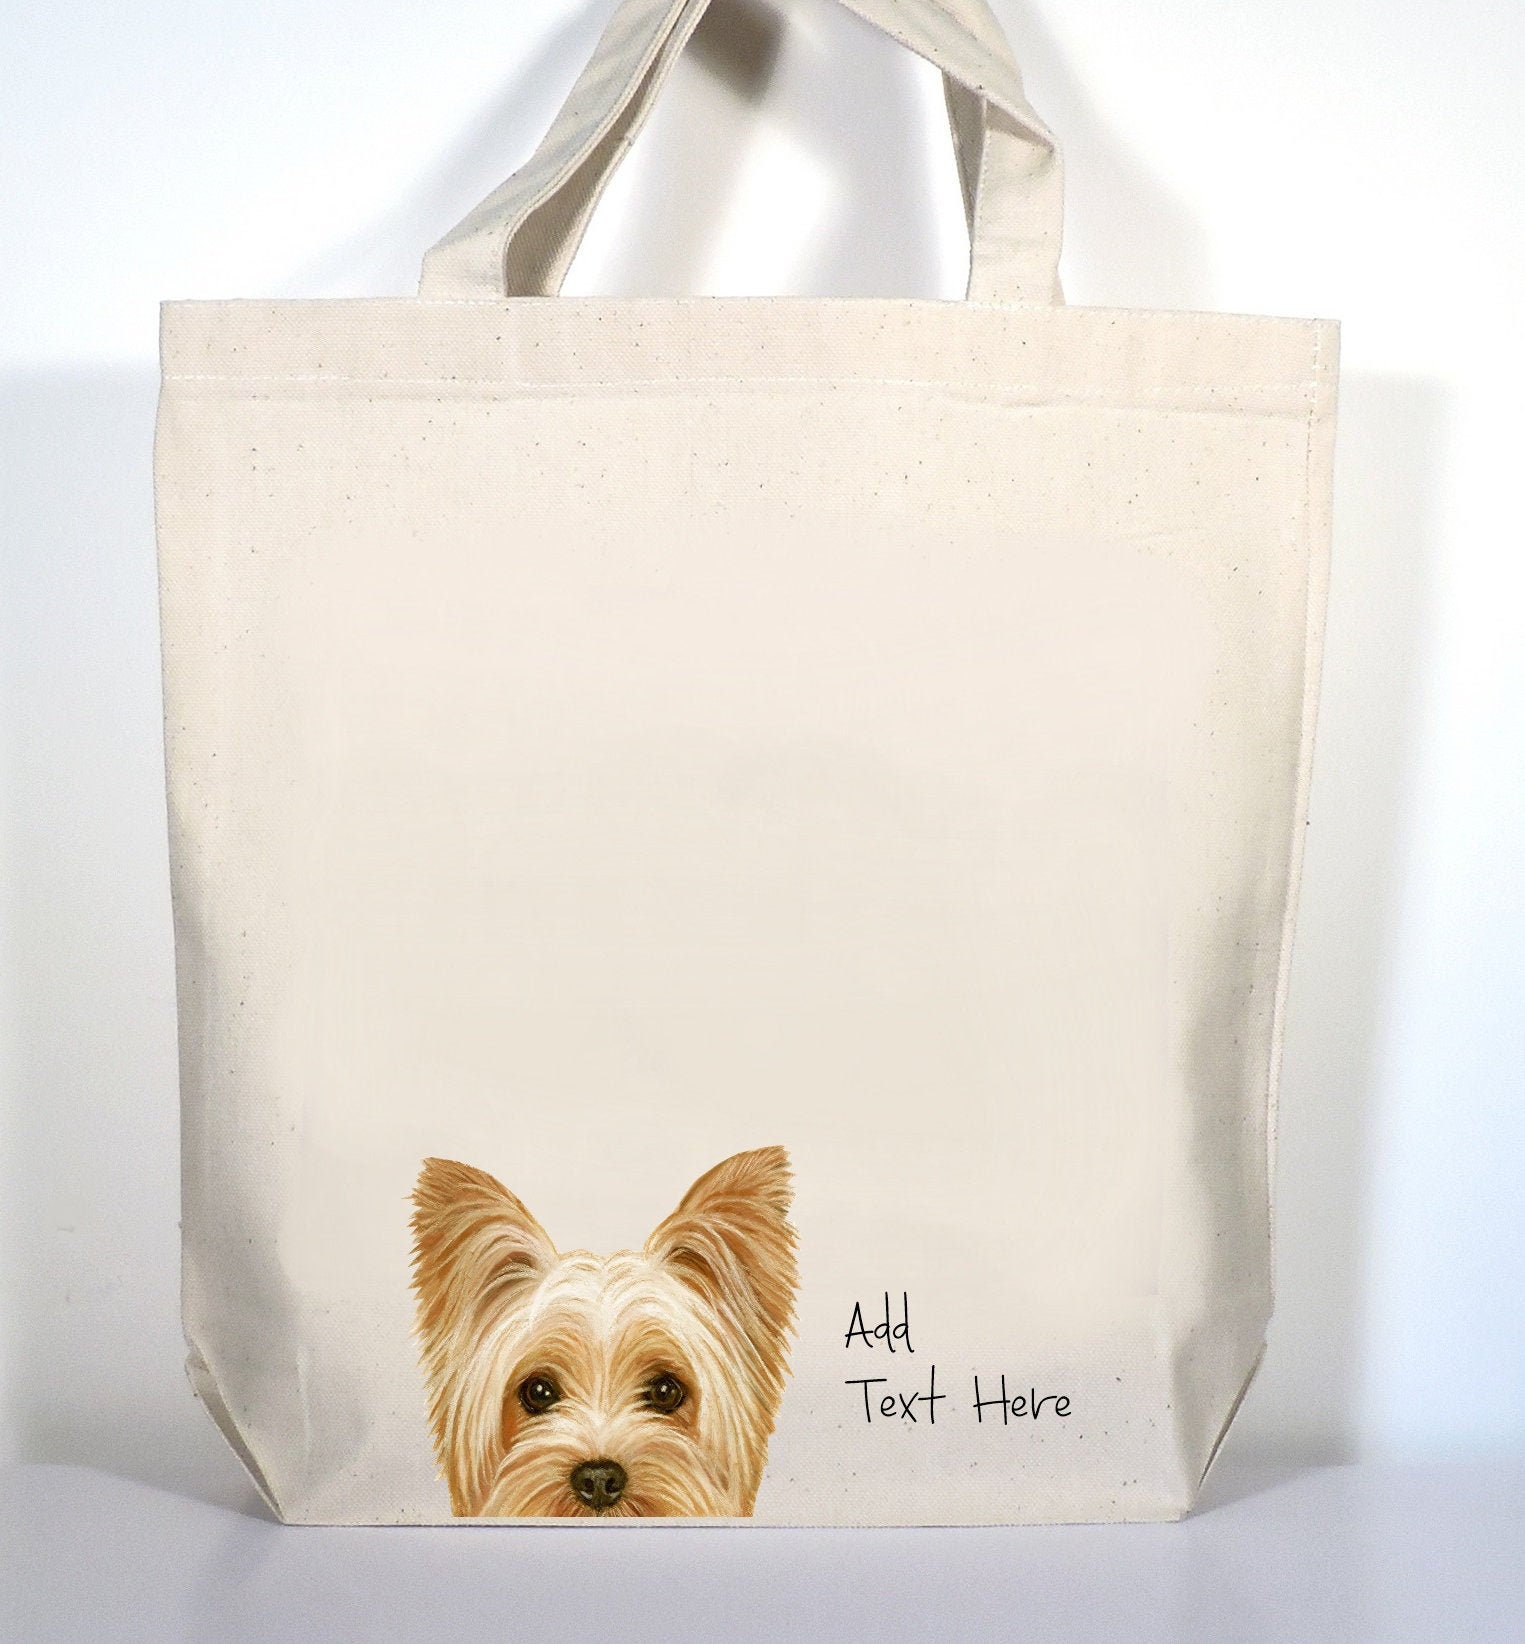 I Love My Morkie Morkshire Terrier Grocery Travel Reusable Tote Bag 